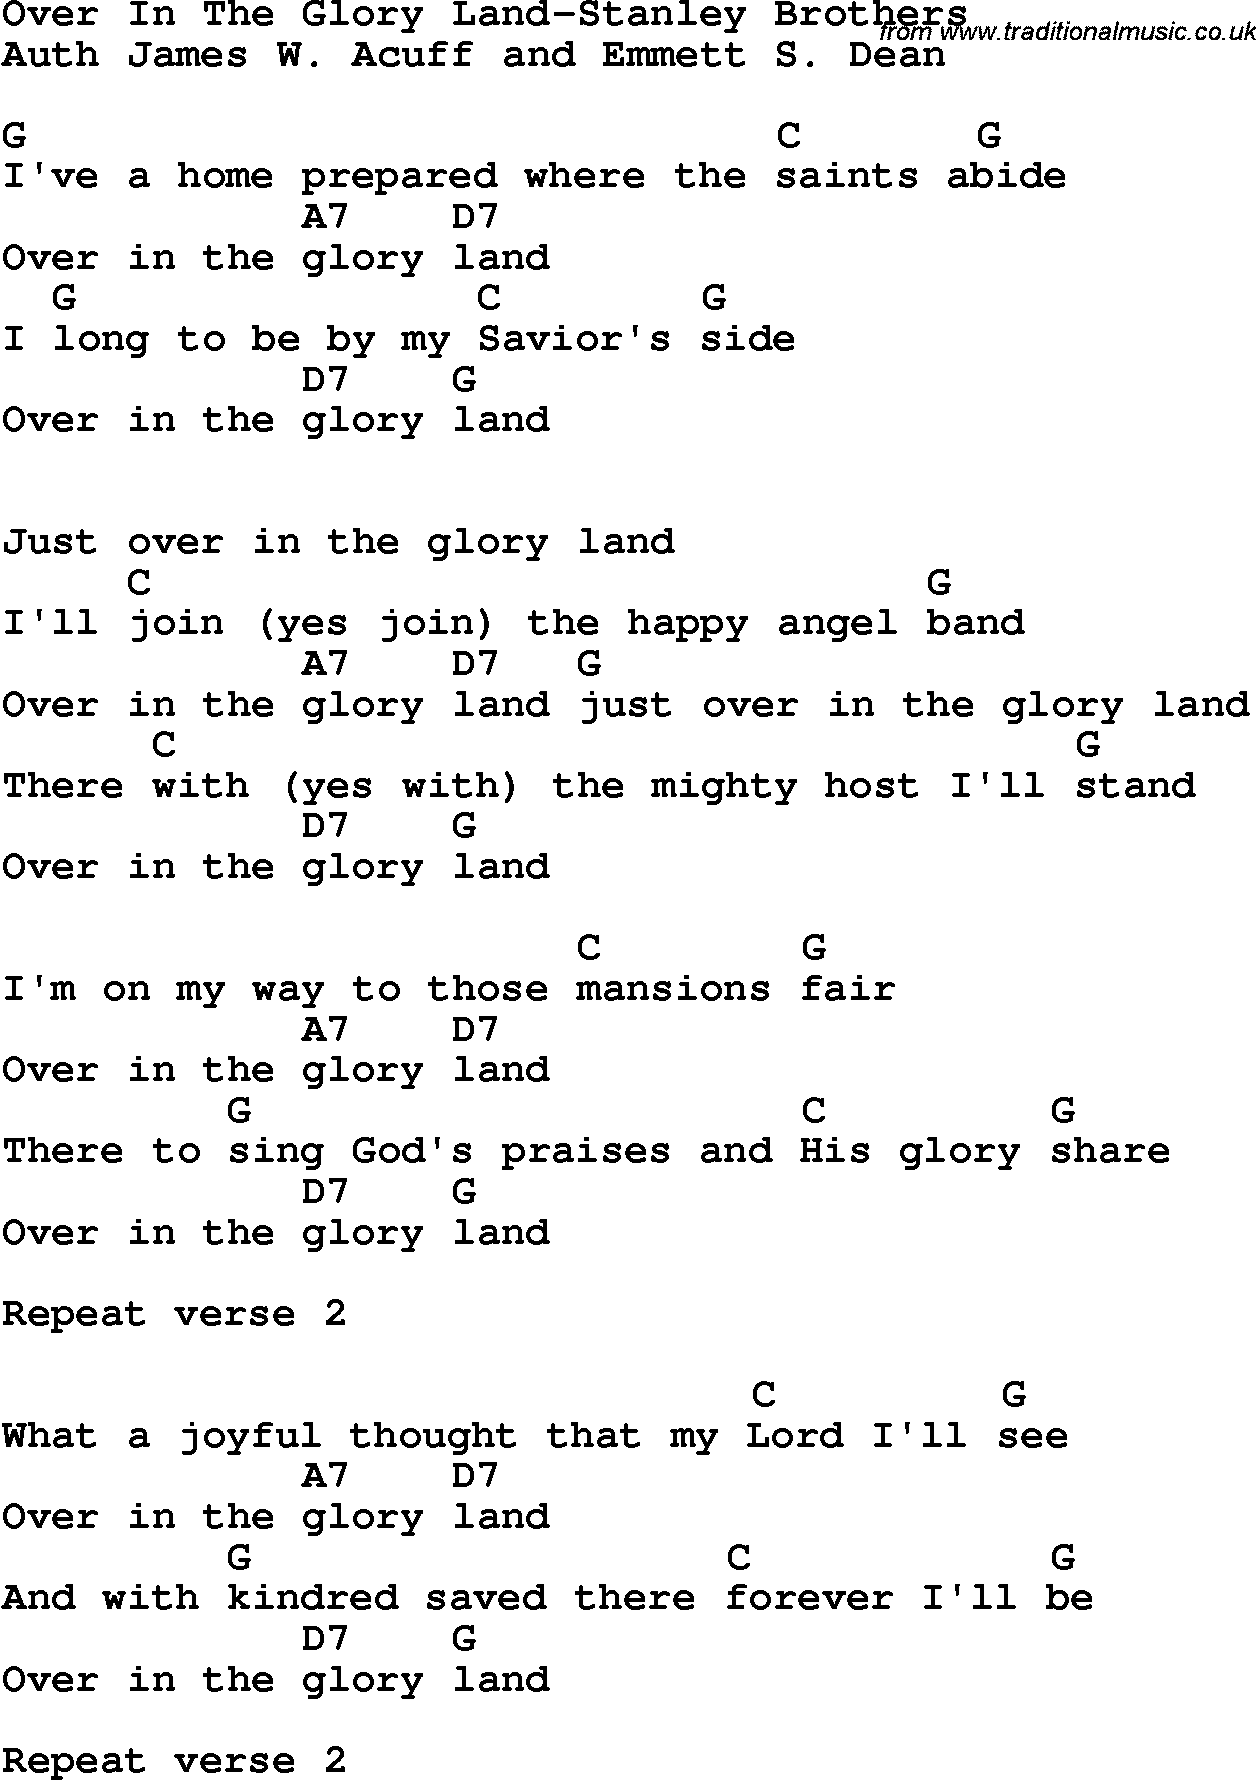 Country, Southern and Bluegrass Gospel Song Over In The Glory Land-Stanley Brothers lyrics and chords